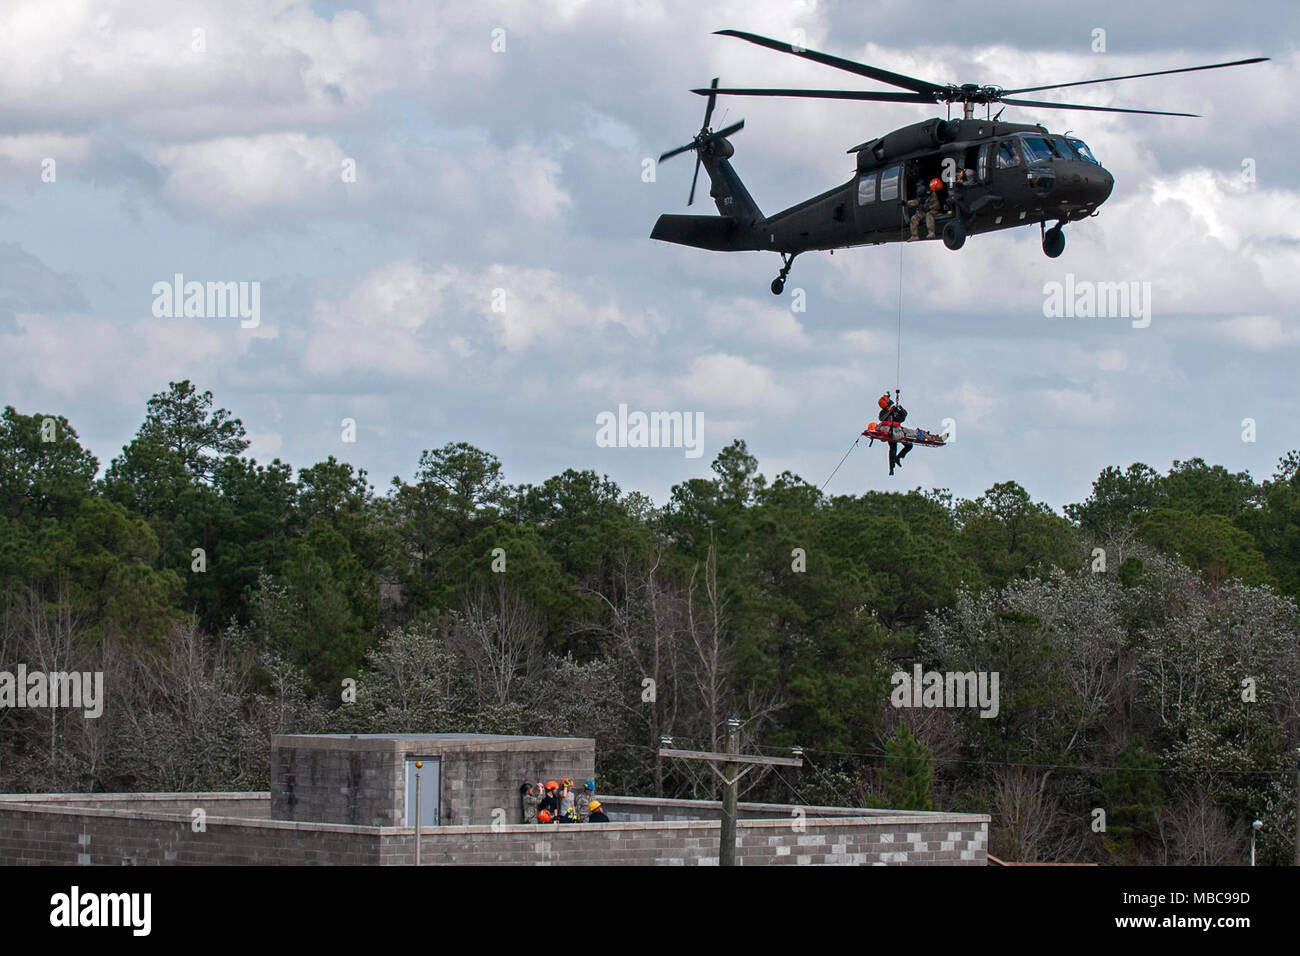 U.S. Army Soldiers with the South Carolina National Guard and members of the South Carolina Helicopter Aquatic Rescue Team use a UH-60 Black Hawk to simulate rescuing survivors from rooftops during the PATRIOT South 18 exercise at Camp Shelby, Miss., Feb. 15, 2018. PATRIOT South 2018 tests the combined abilities of the National Guard, along with state and local agencies, to respond during natural disasters using simulated emergency scenarios. (U.S. Air National Guard Stock Photo